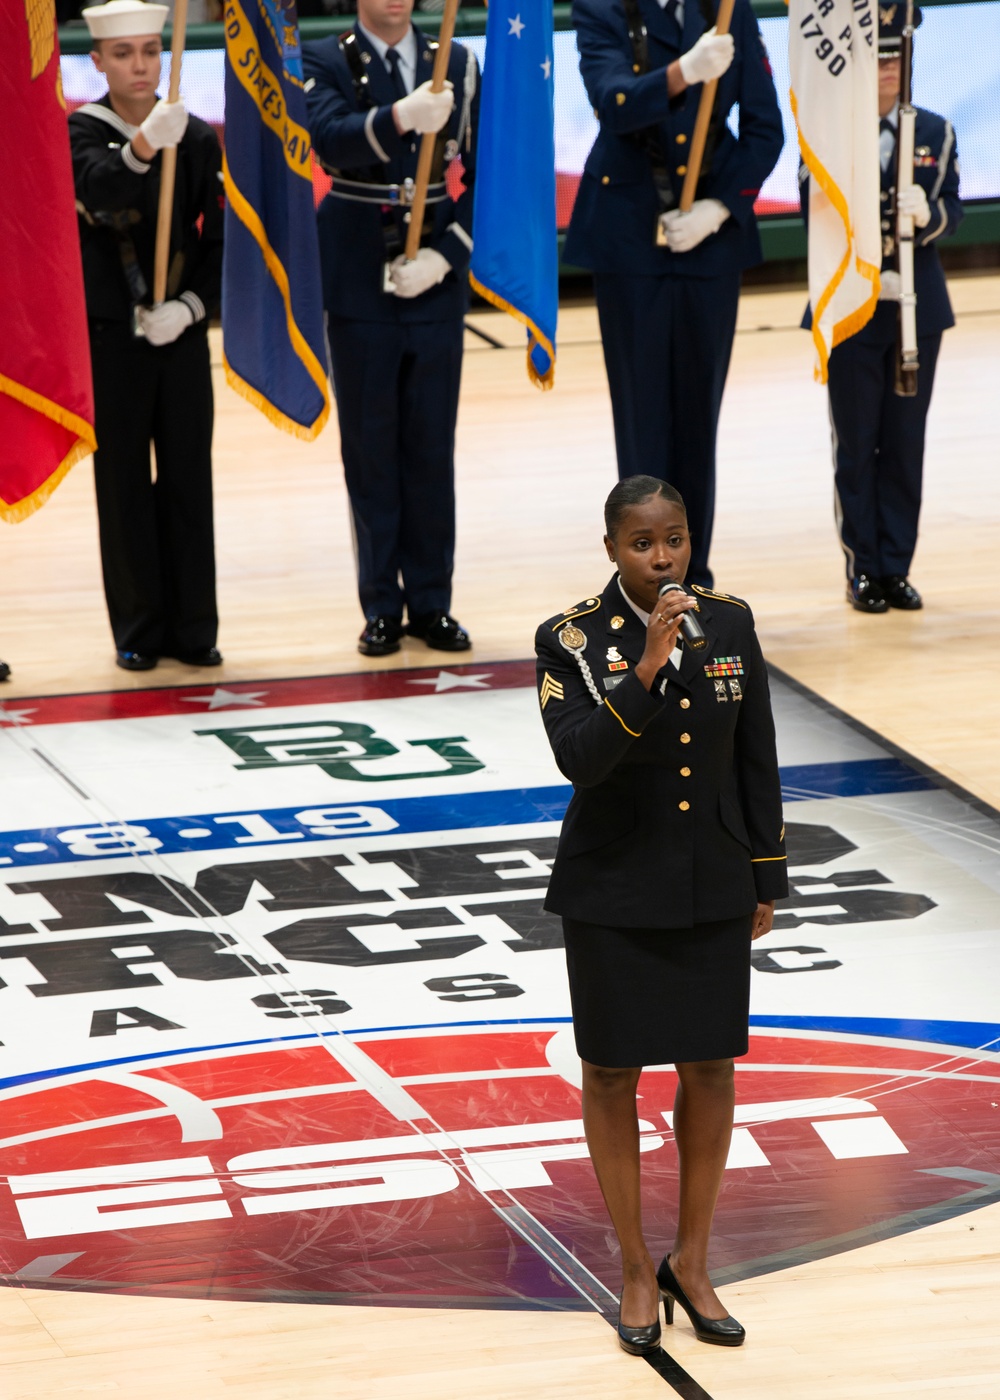 ESPN hosts ninth annual Armed Forces Classic